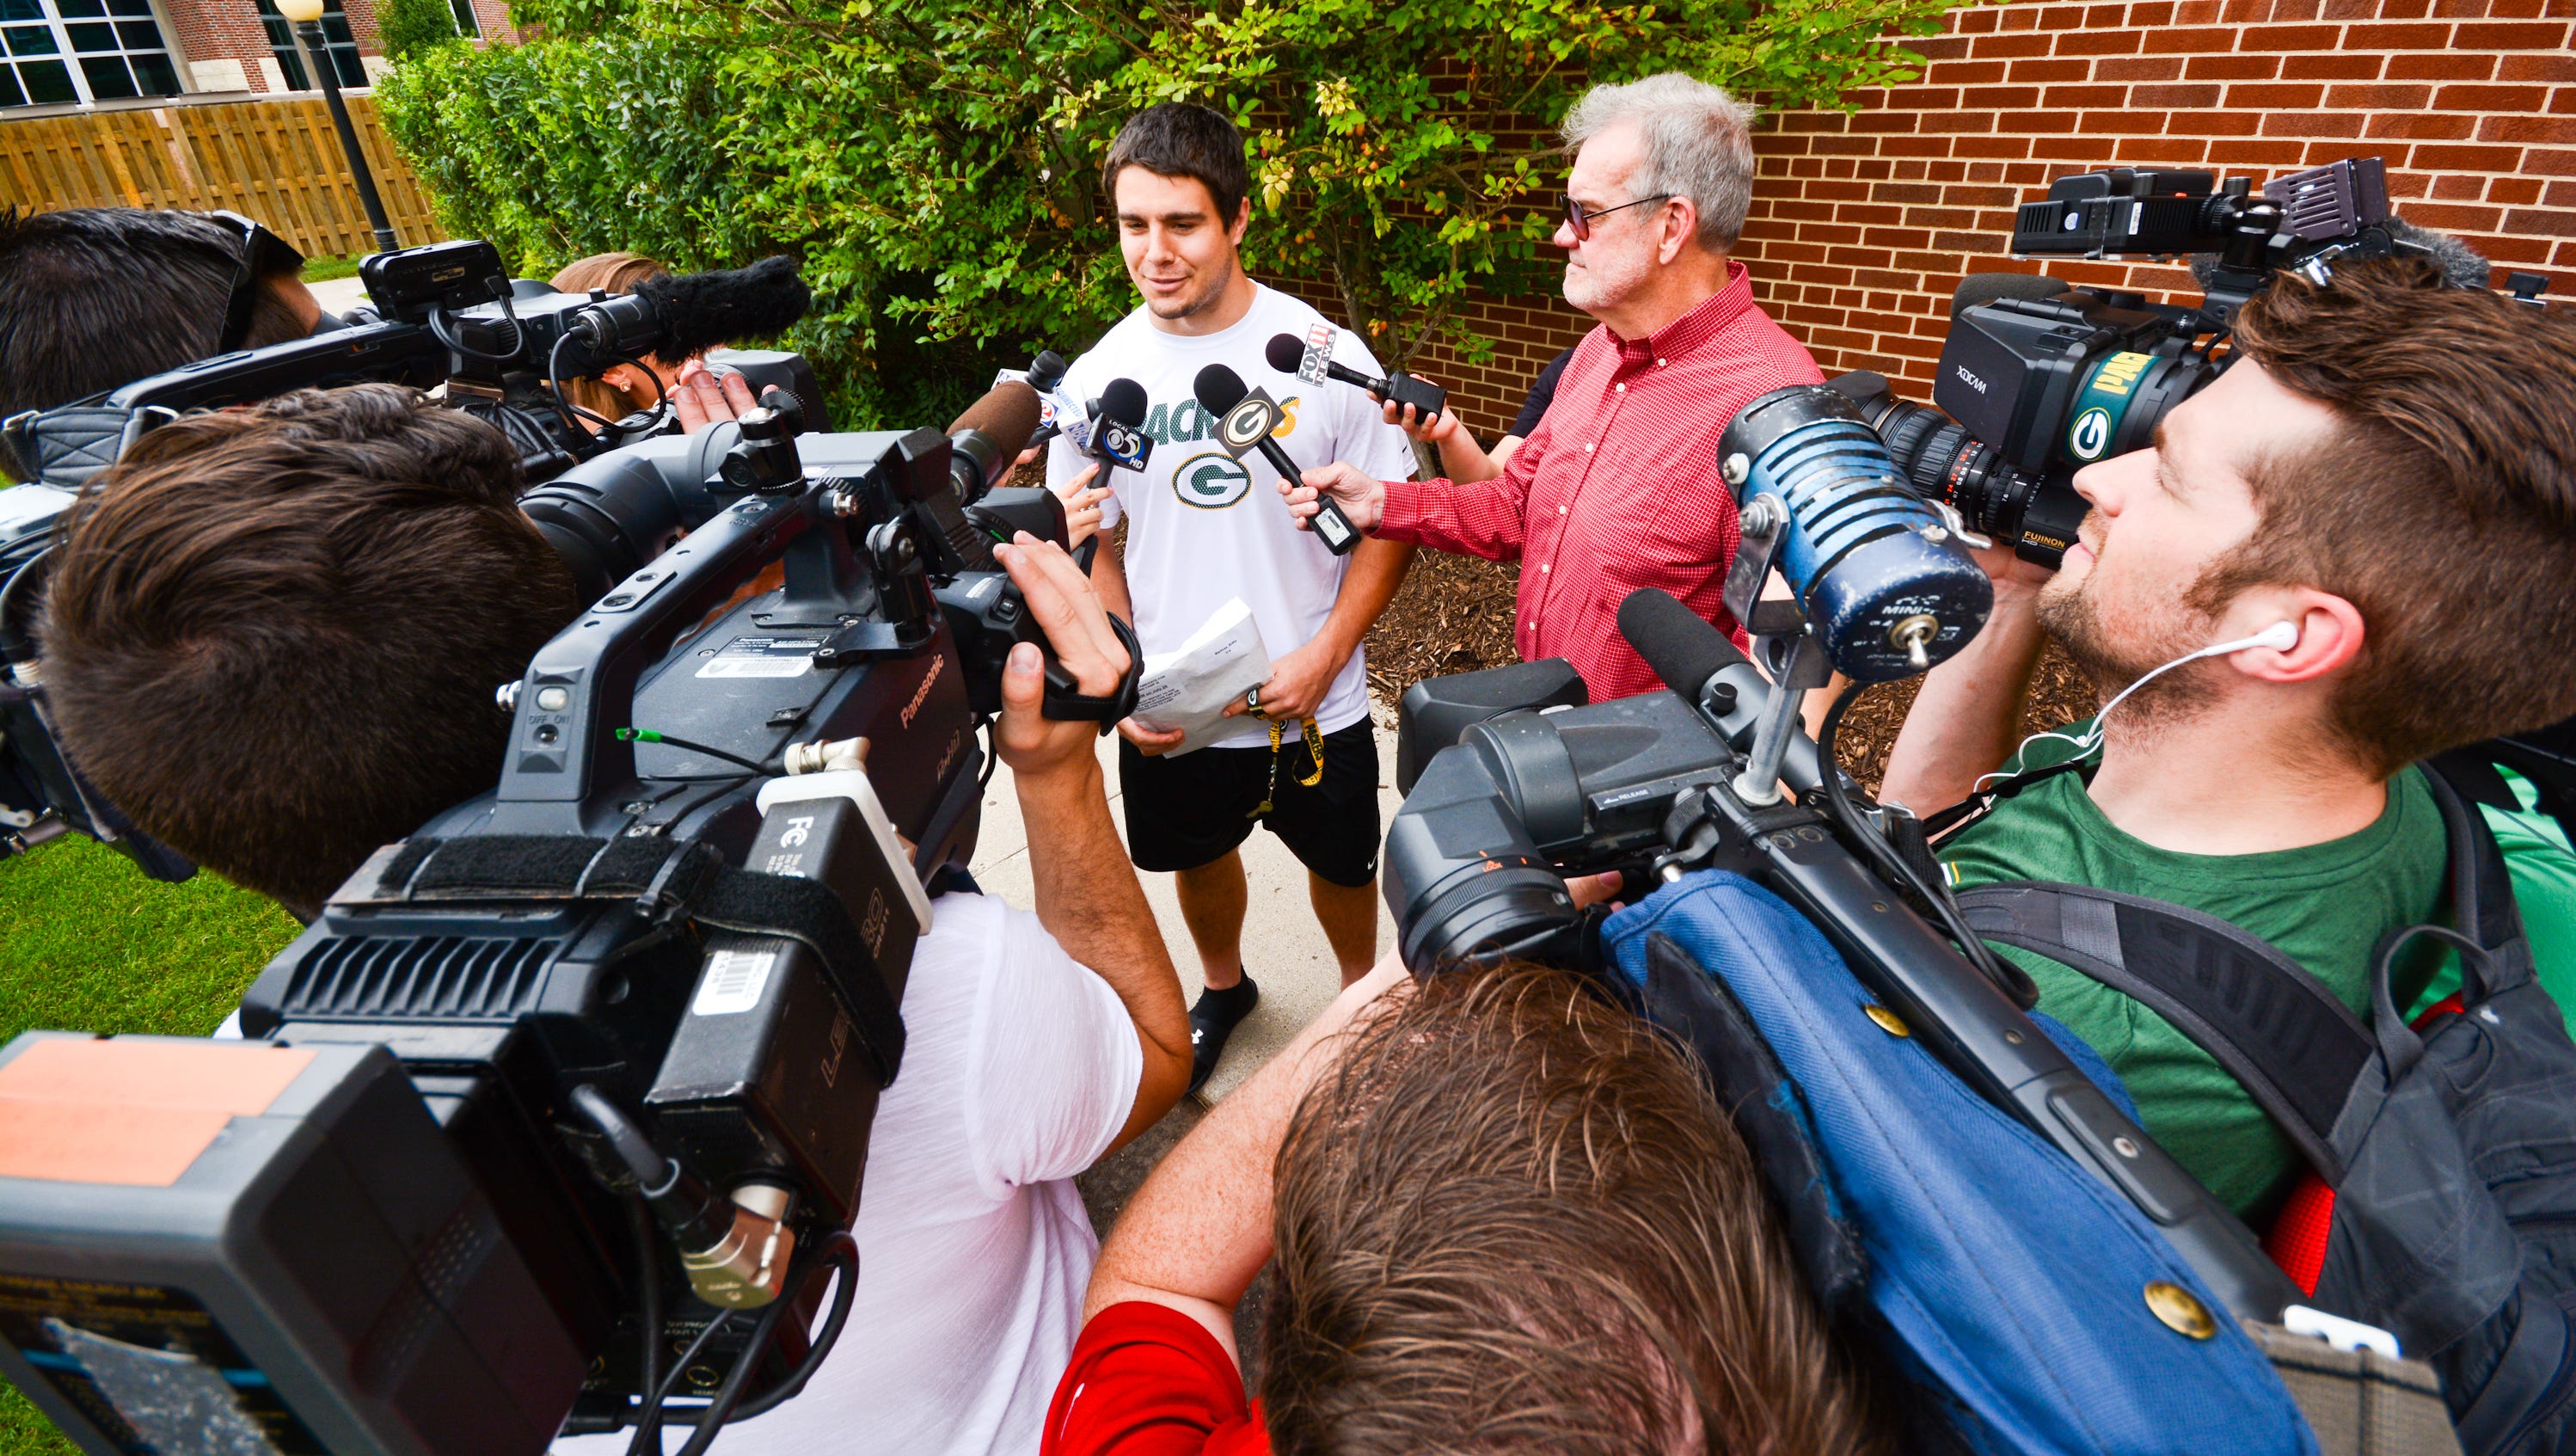 Green Bay Packers rookie Blake Martinez speaks with reporters outside Victor McCormick Hall at St. Norbert College, where he, along with other team members, stay during their summer training camp.